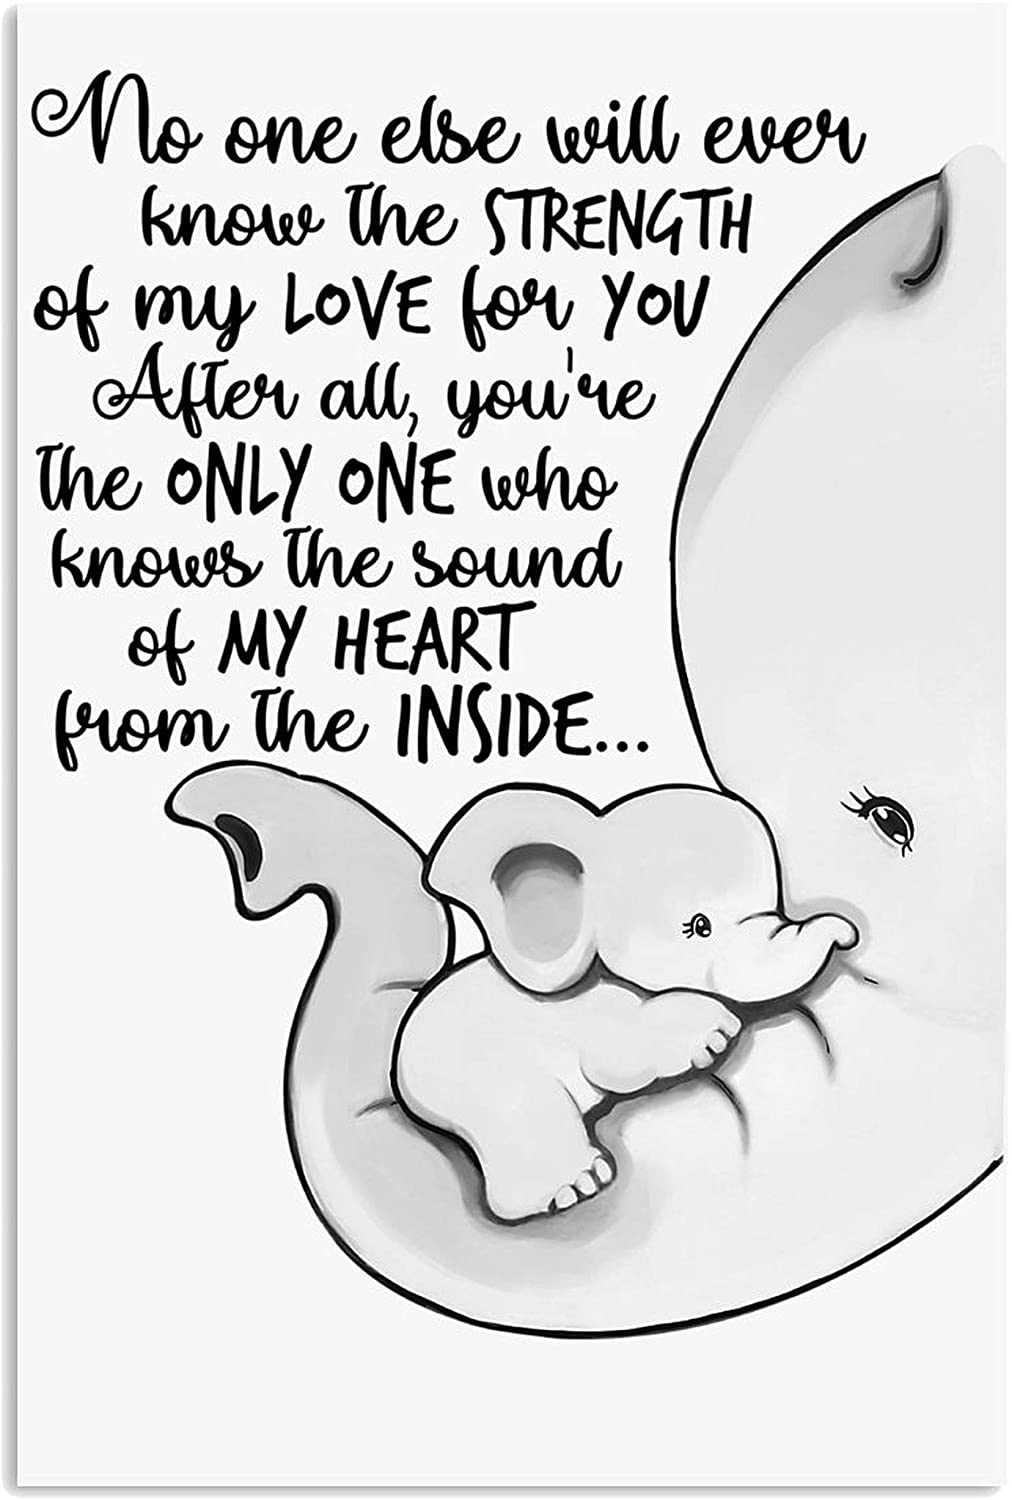 ANDIEZ Baby Elephant No One Else Will Ever Know The Strength of My Love for You Poster